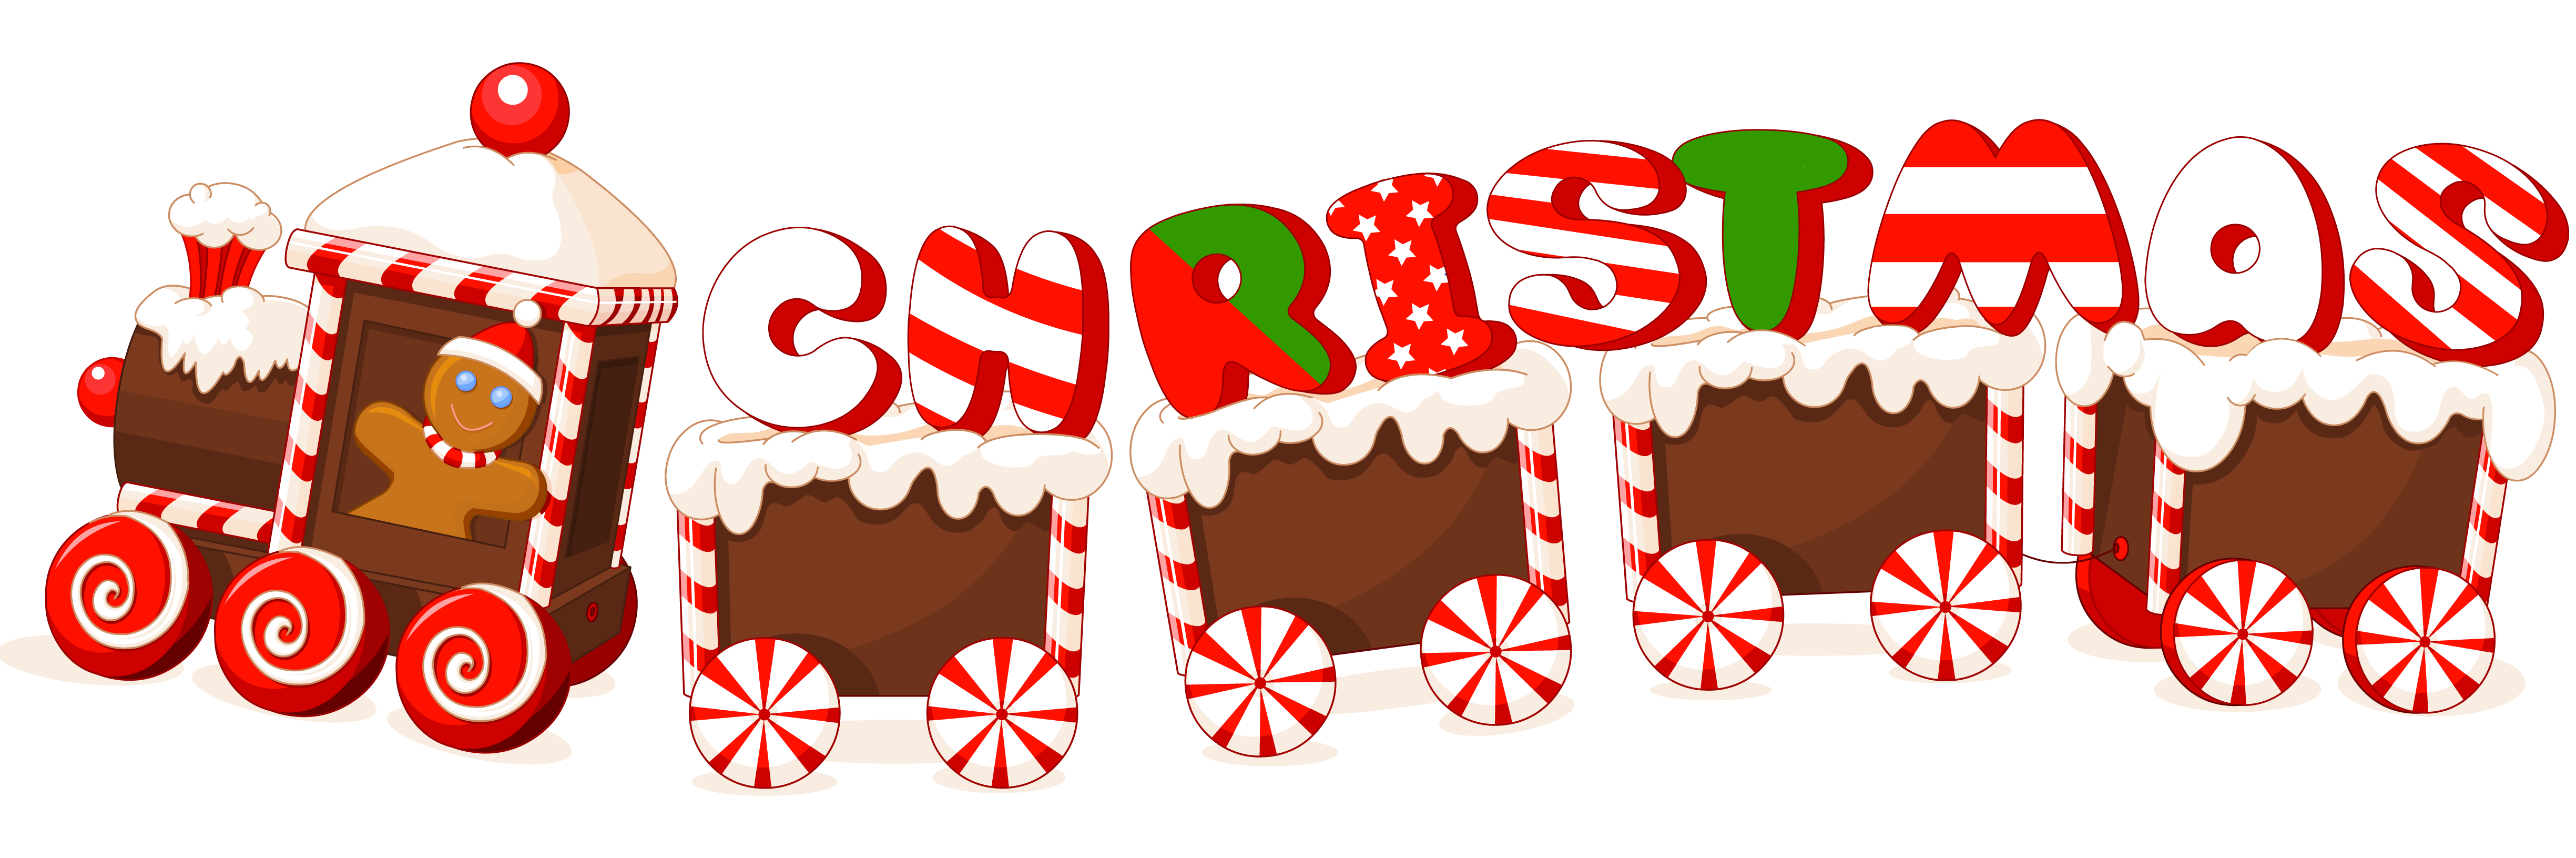 Merry Christmas Clip Art Png In Addition To Background For